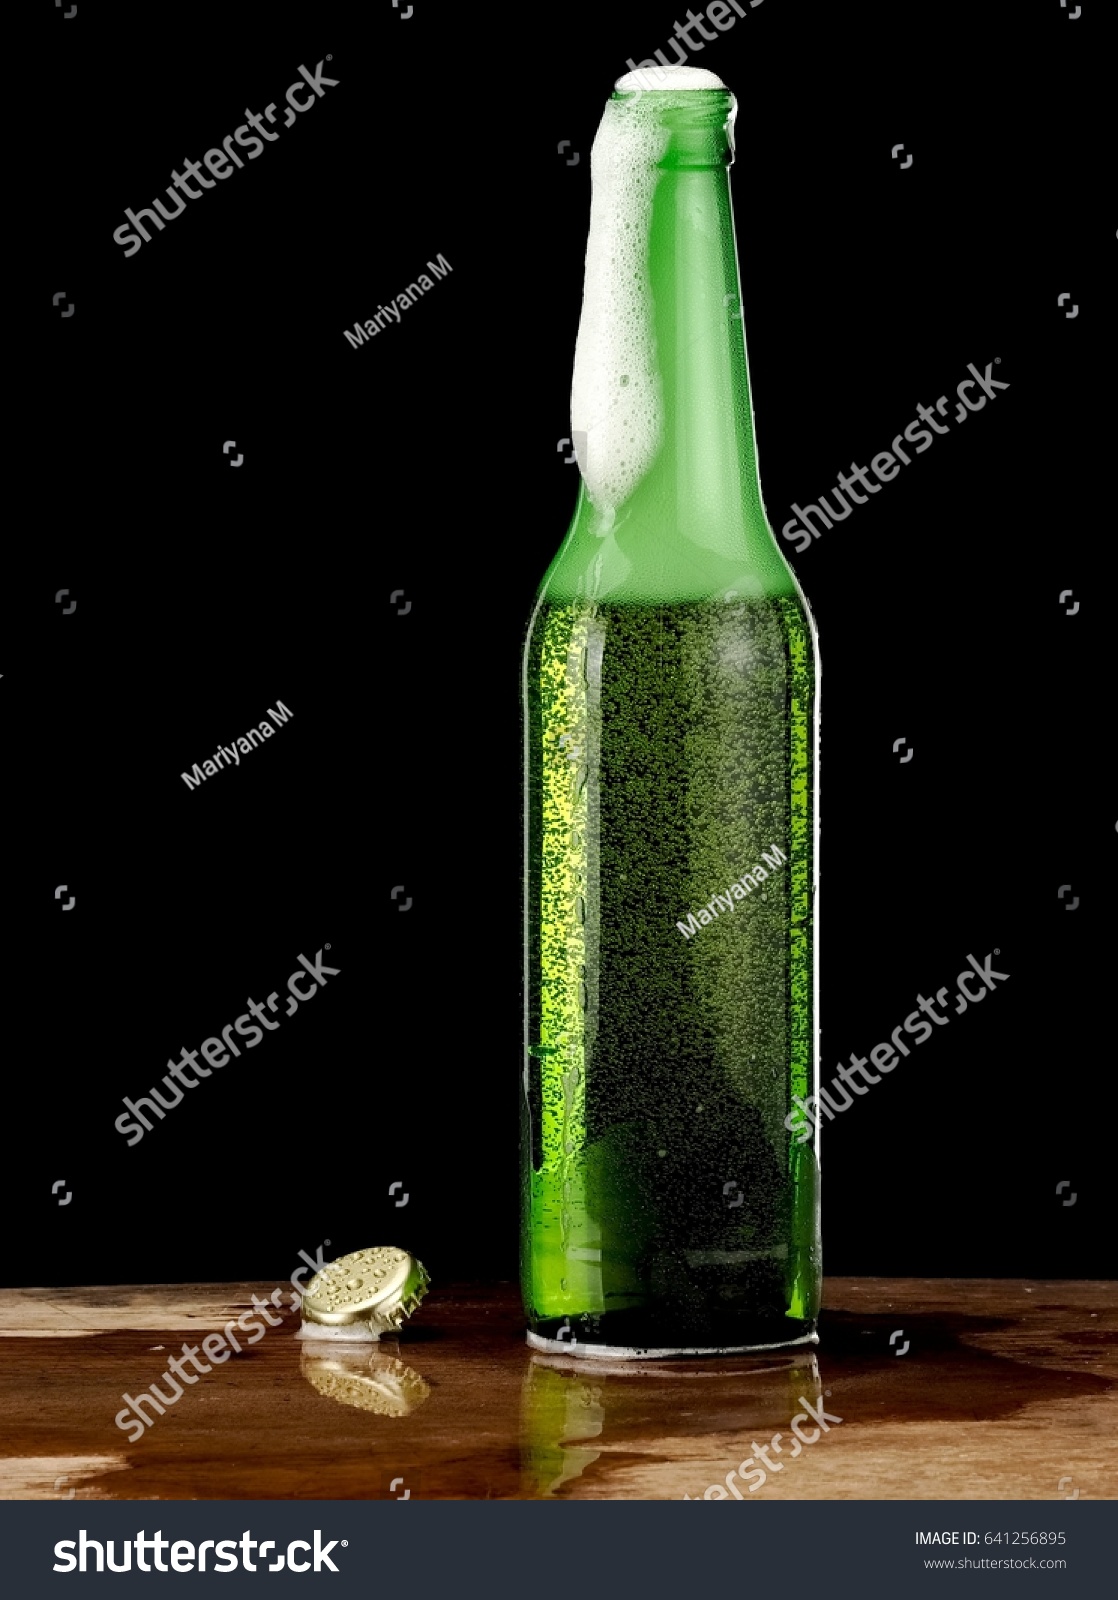 Opened Green Beer Bottle Bubbles Foam Food And Drink Stock Image 641256895